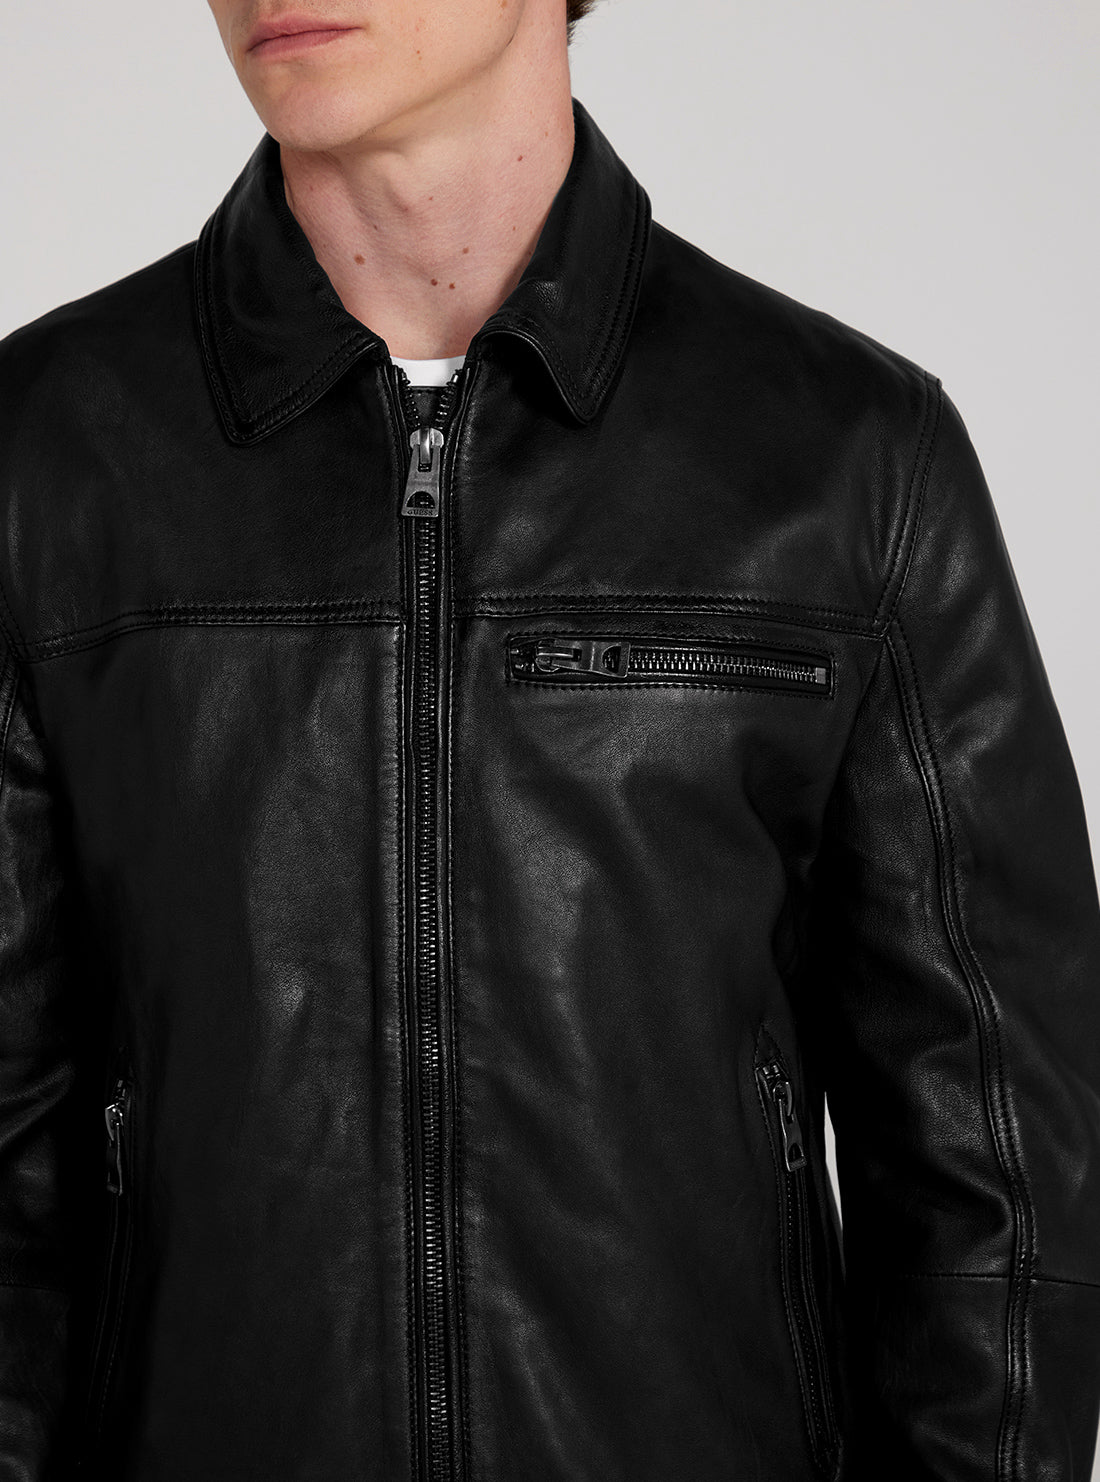 GUESS Black Leather Jacket detail view